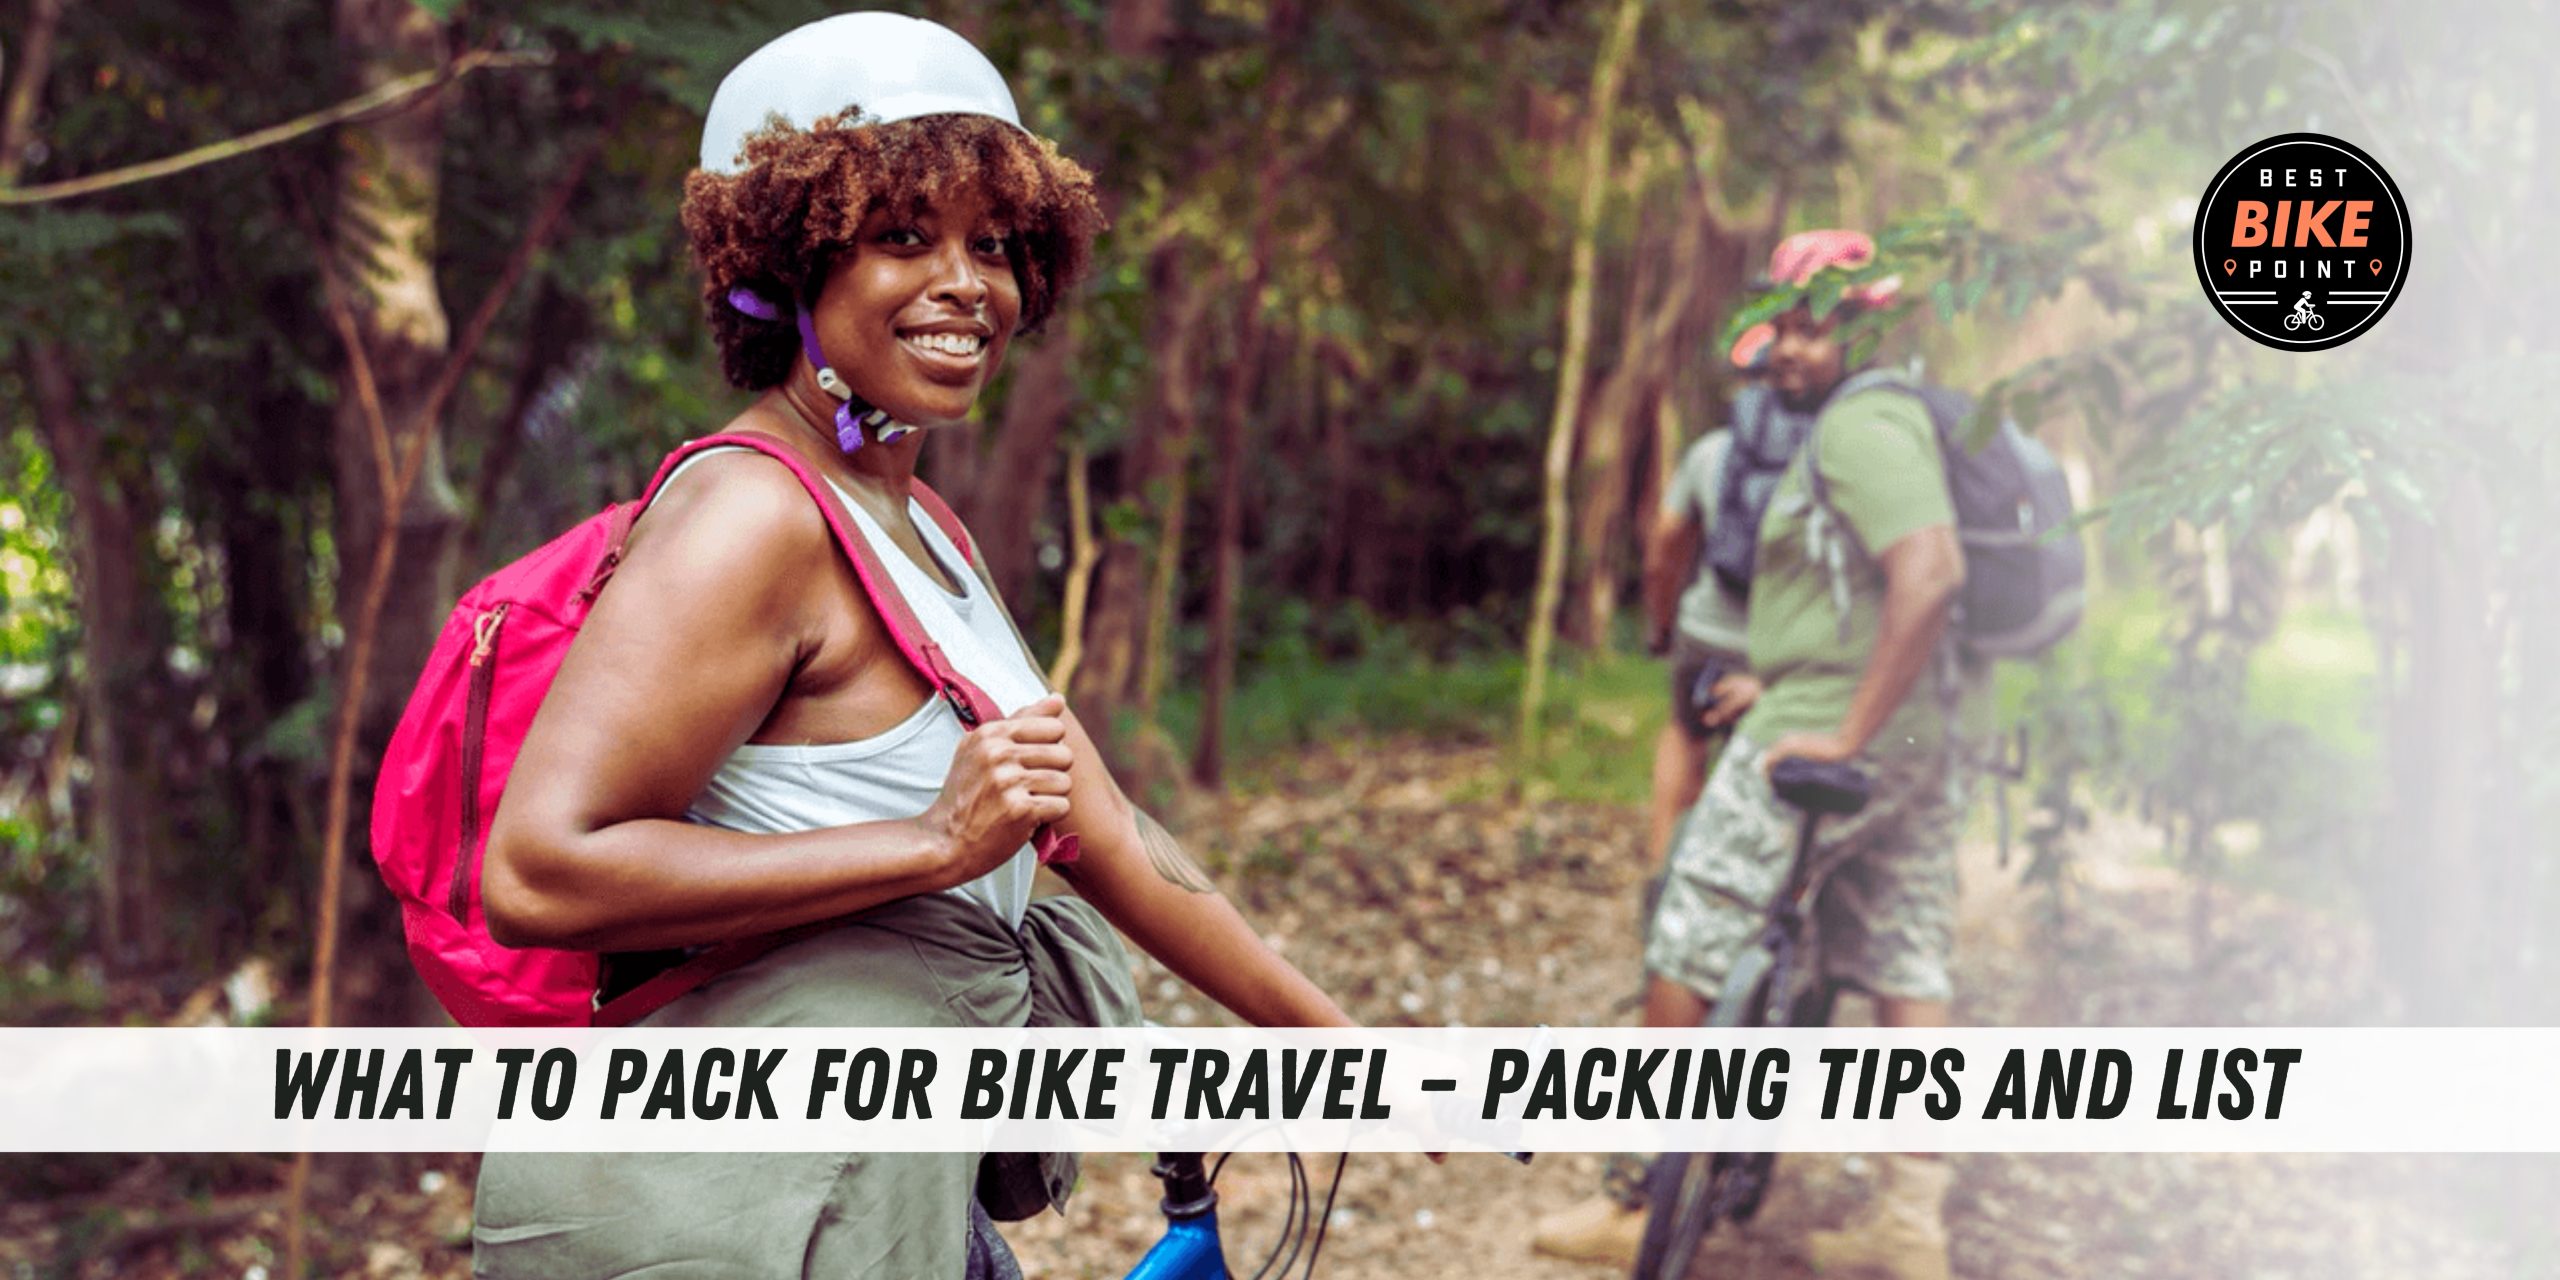 What to Pack for Bike Travel